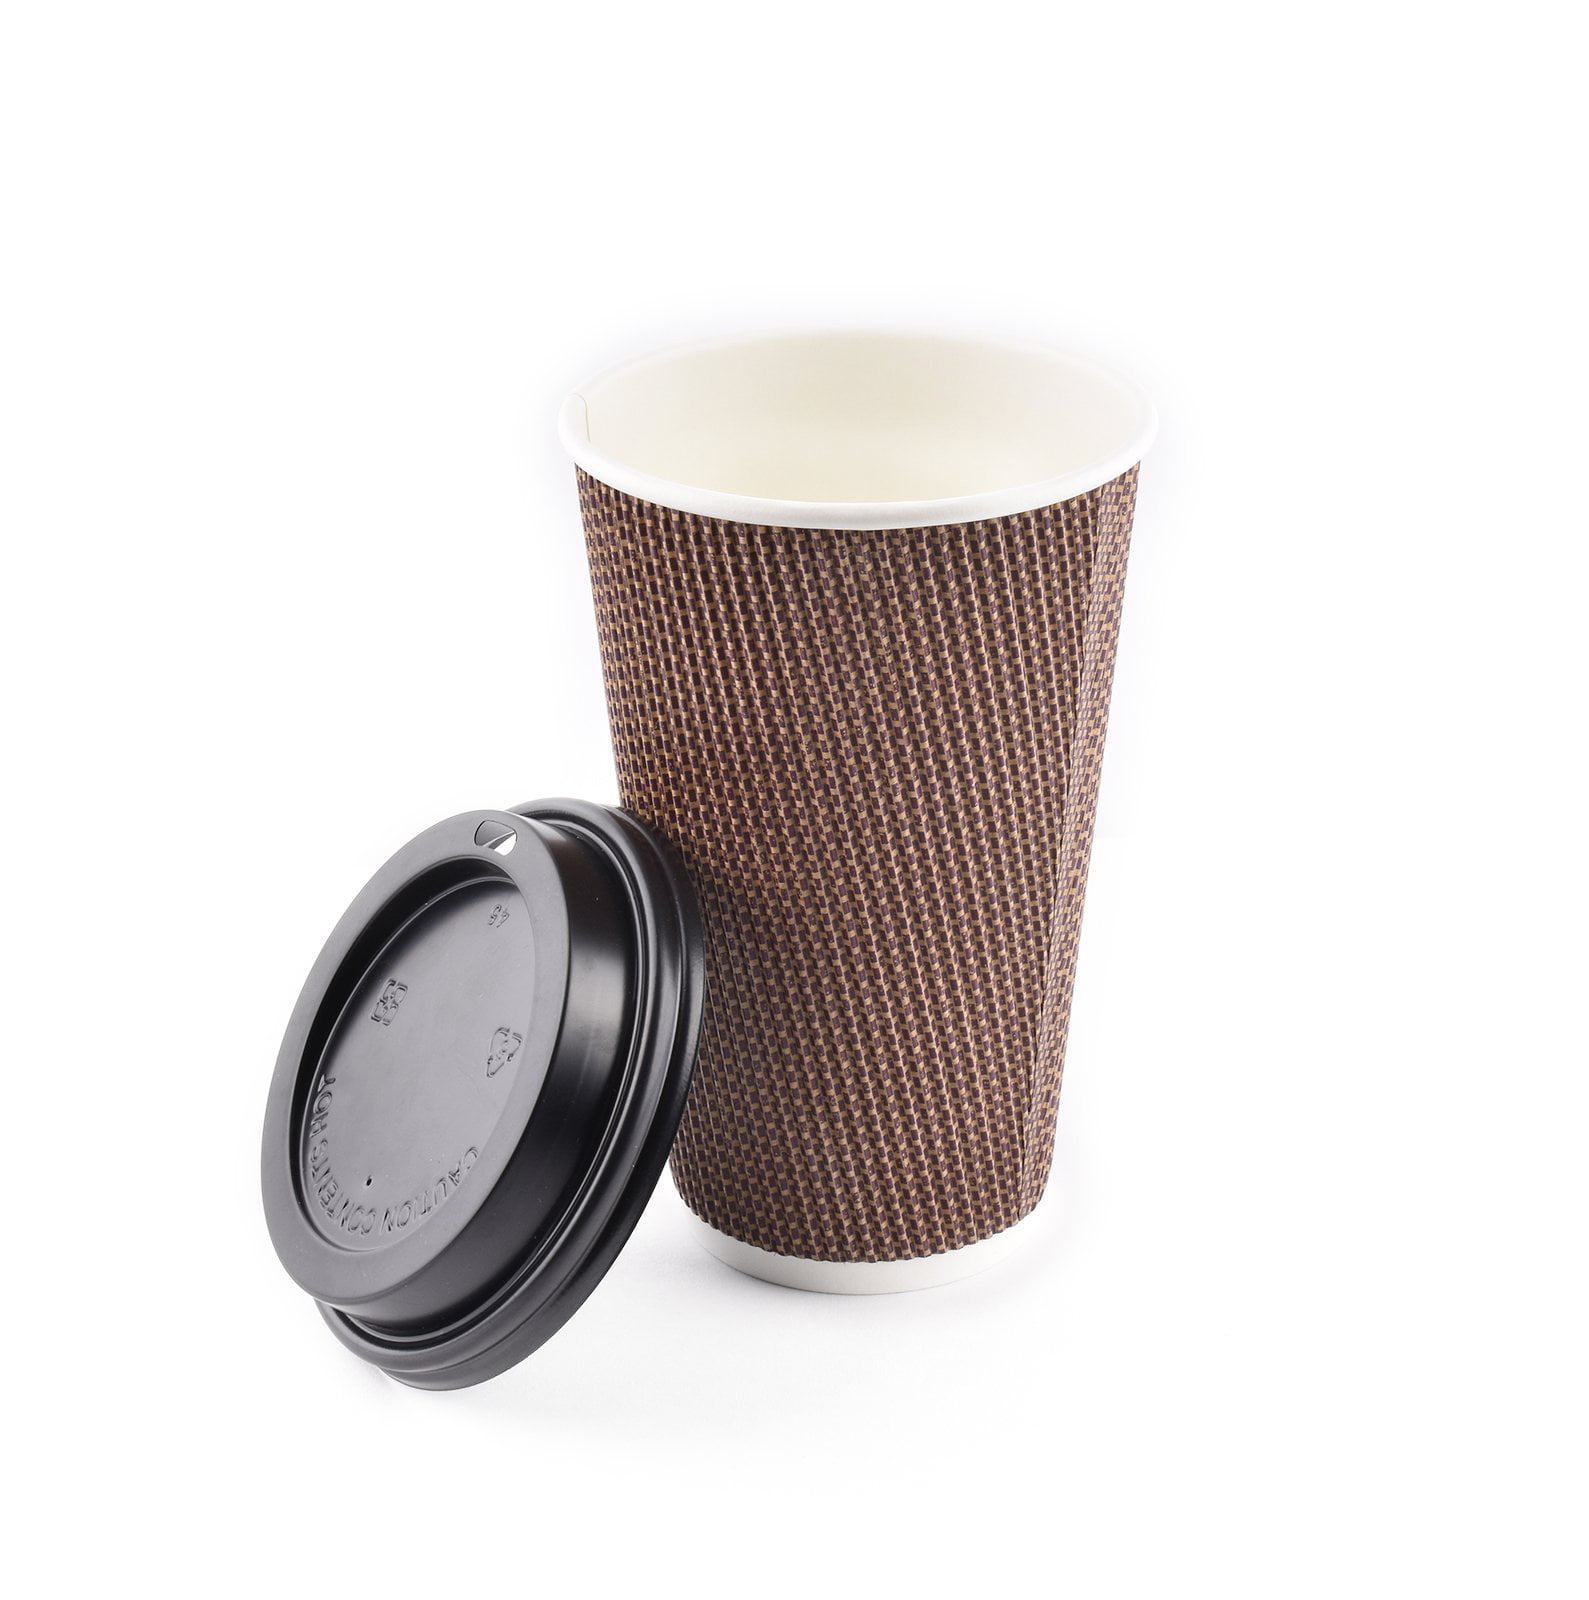 2000 TRIPLE WALLED BLACK RIPPLE PAPER CUPS FOR HOT DRINKS OPTIONAL WHITE LIDS 